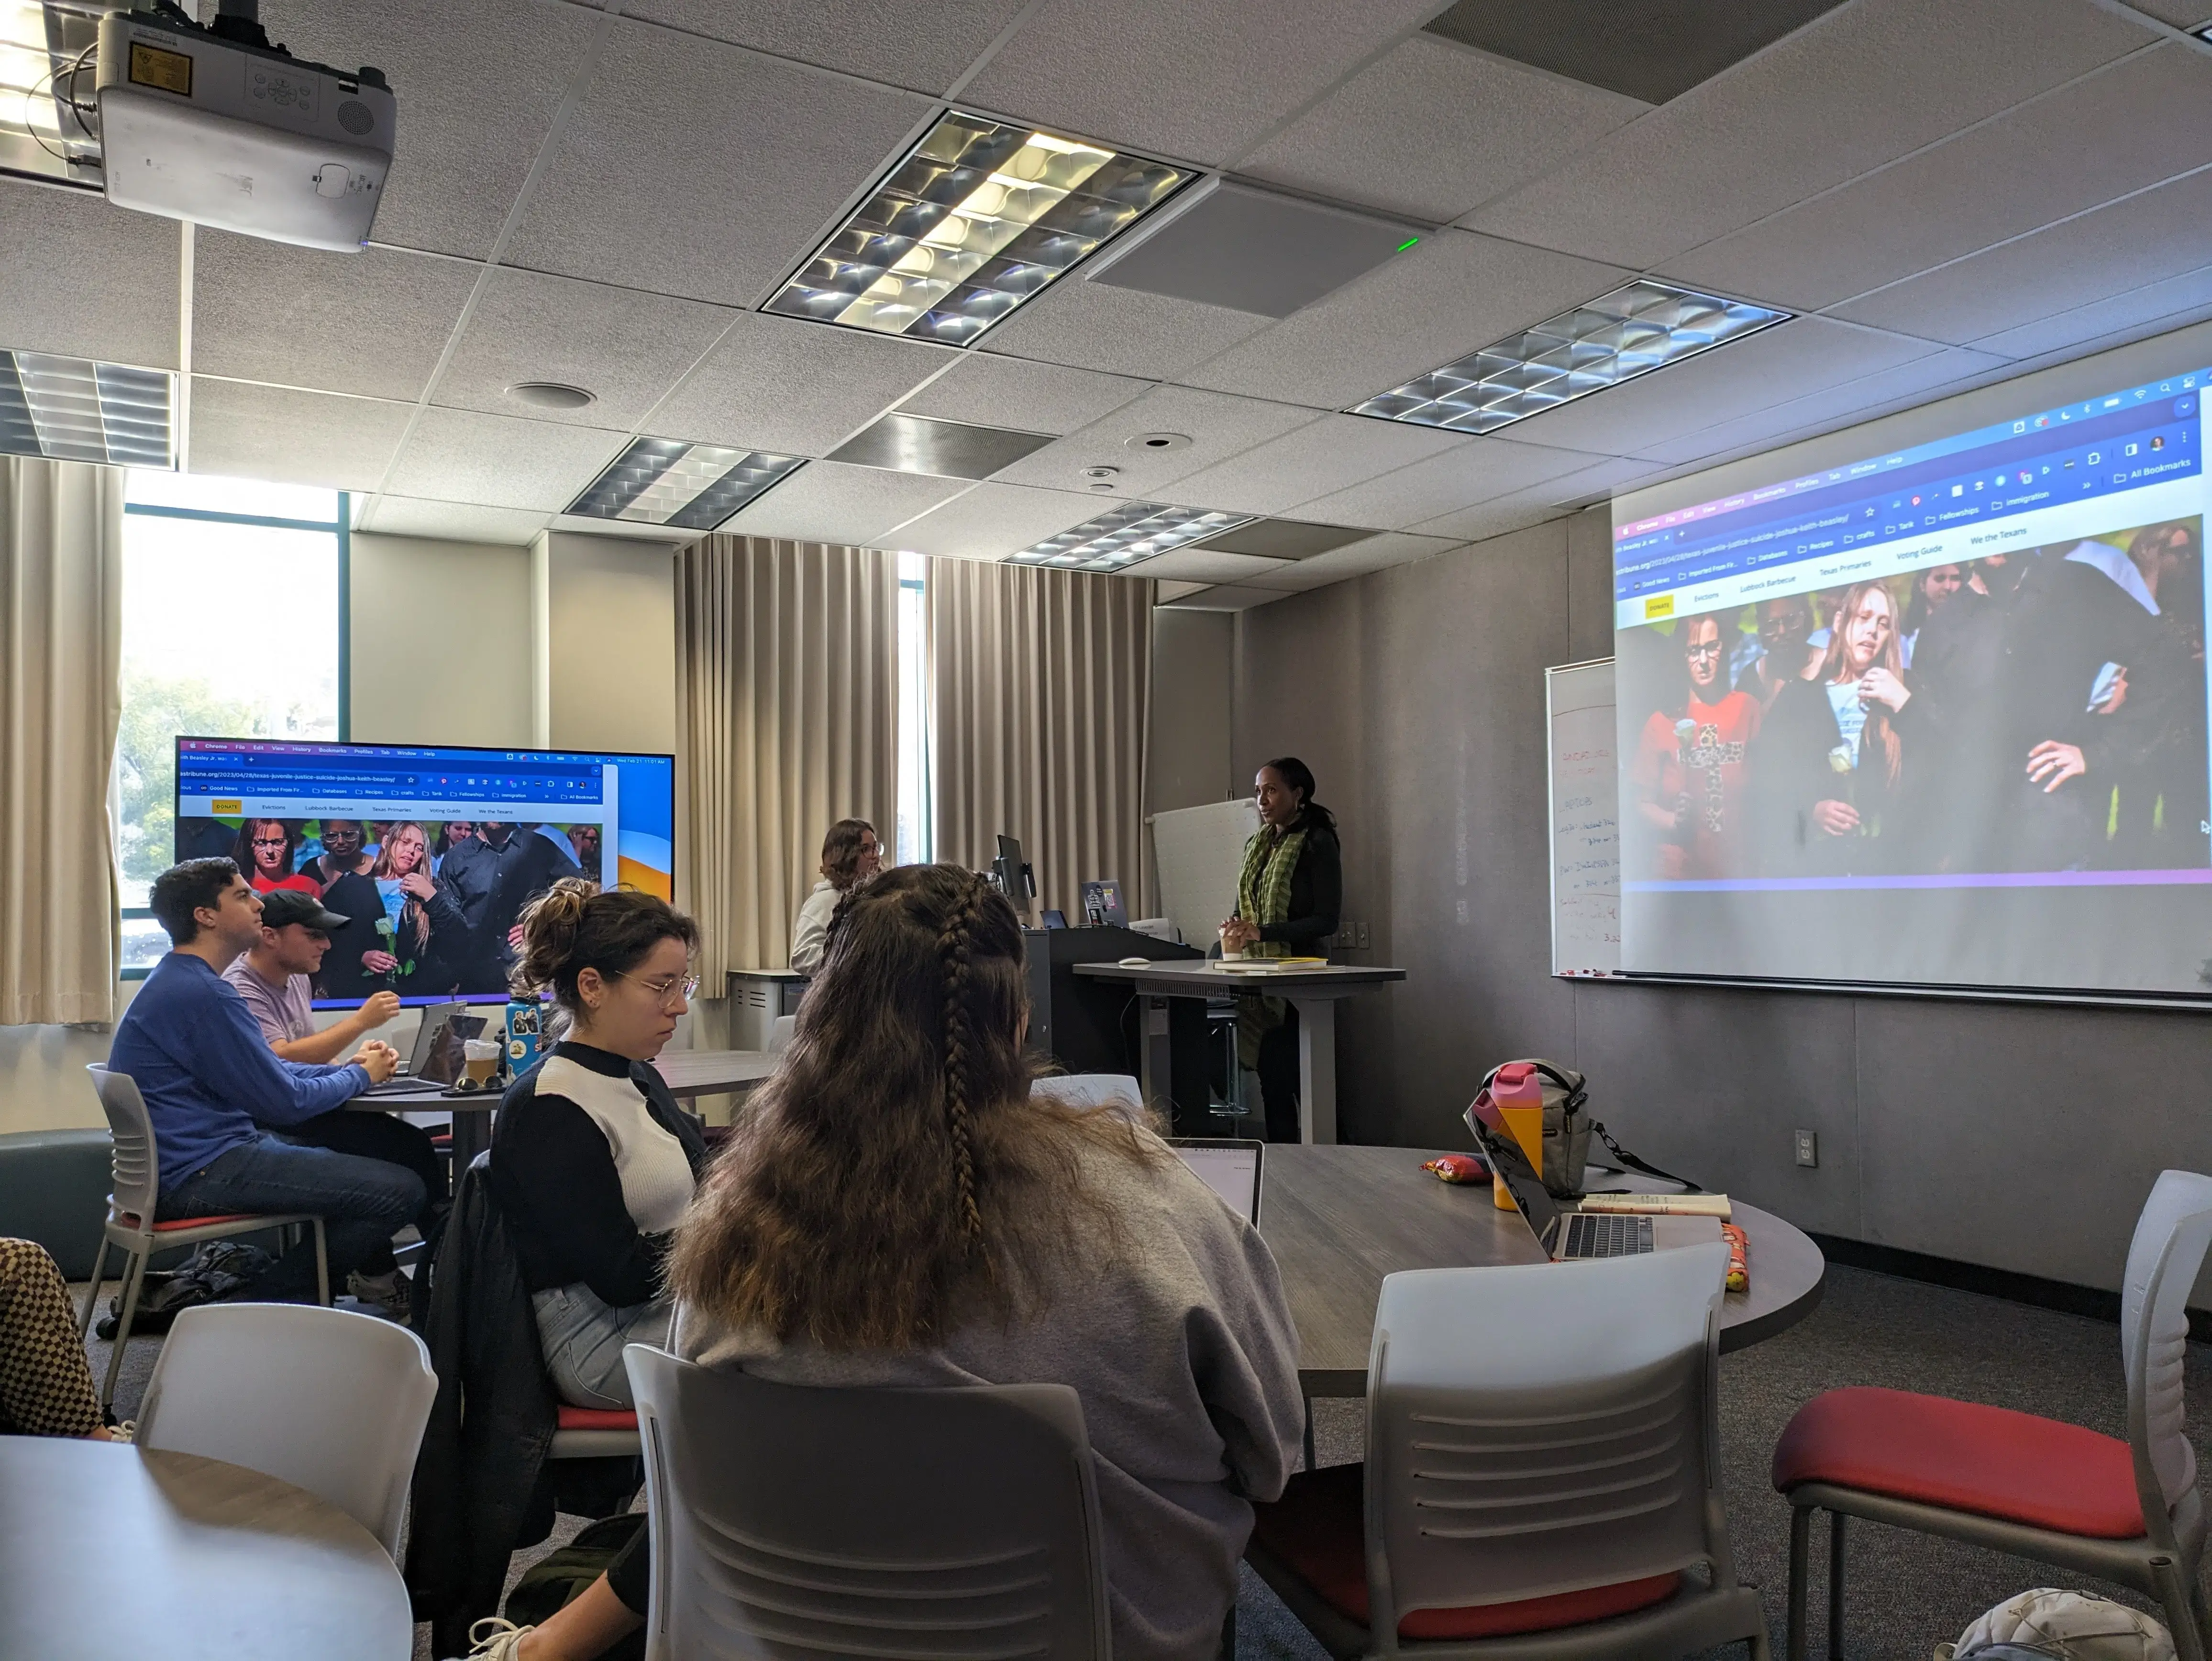 Lisa Armstrong talks to a class of students at San Diego State University